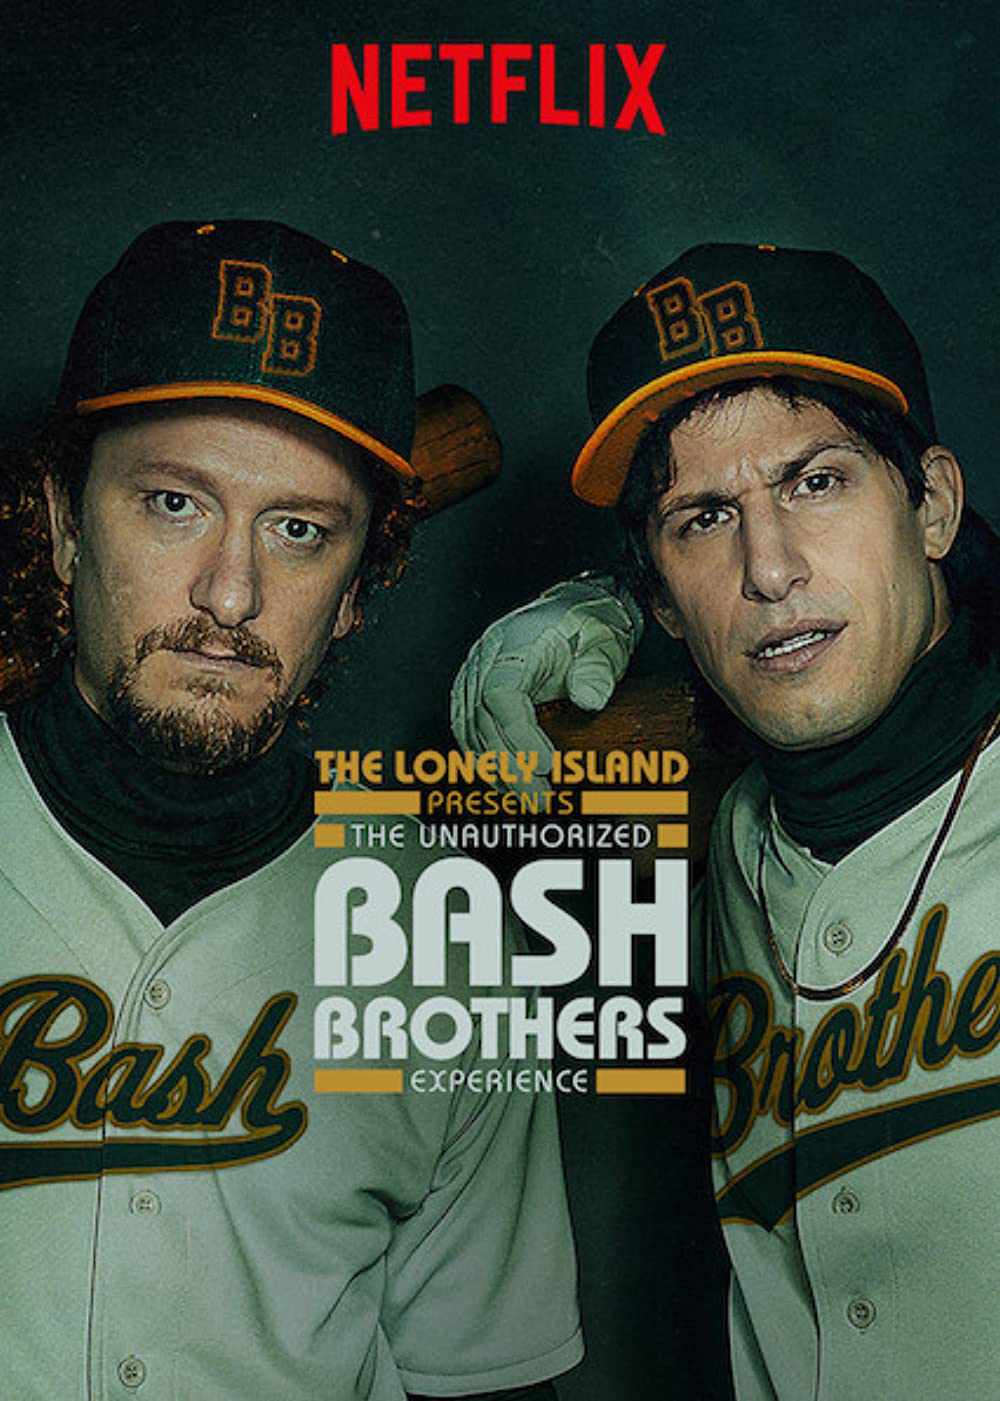 Poster Phim The Lonely Island: Chuyện vui về cặp đôi bóng chày (The Lonely Island Presents: The Unauthorized Bash Brothers Experience)